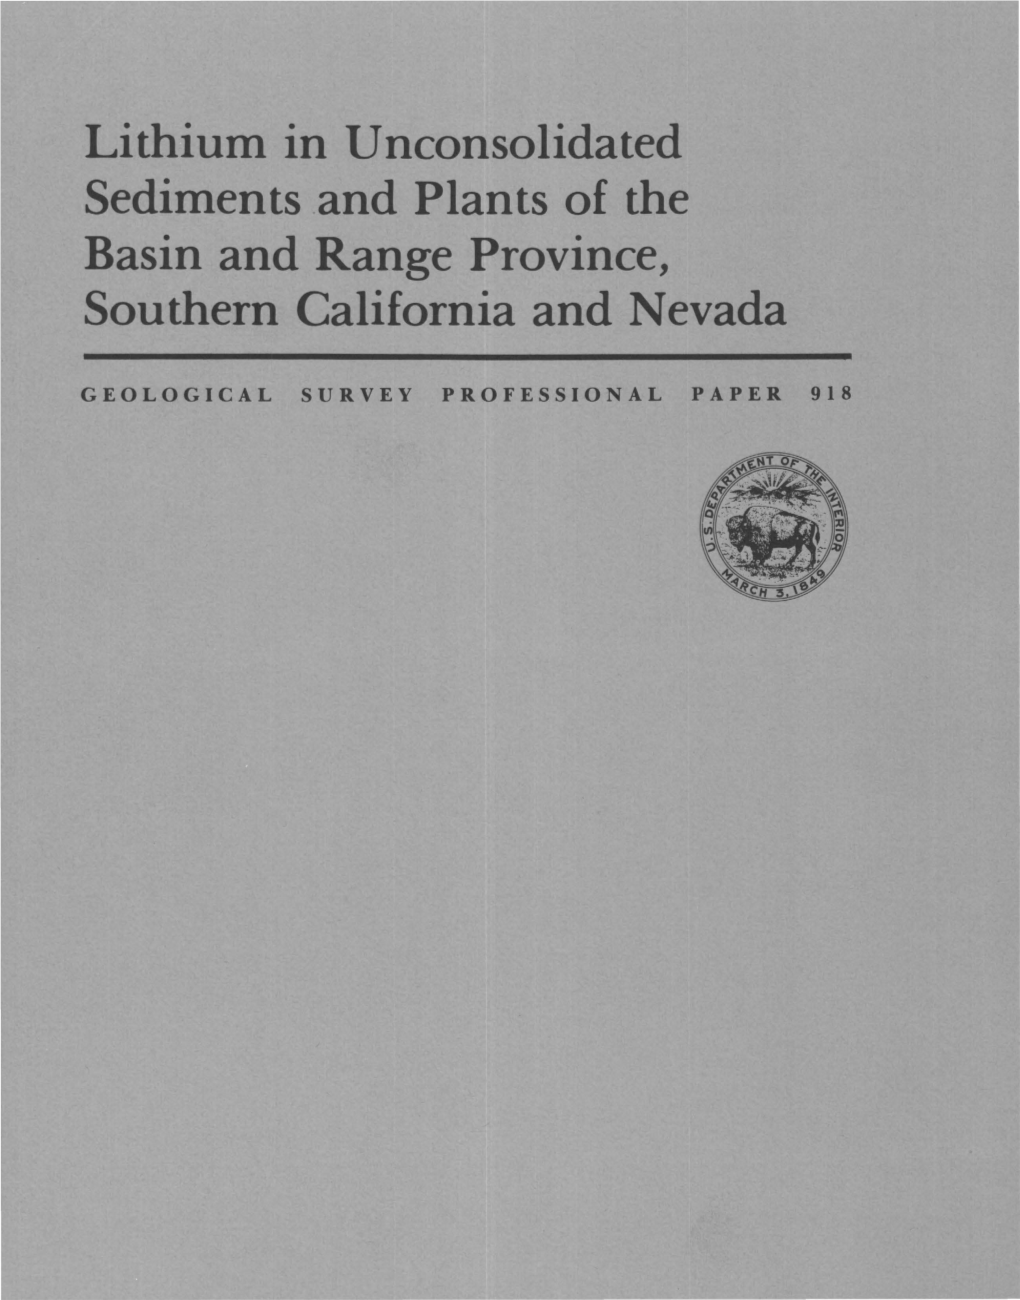 Lithium in Unconsolidated Sediments .And Plants of the Basin and Range Province, Southern California and Nevada